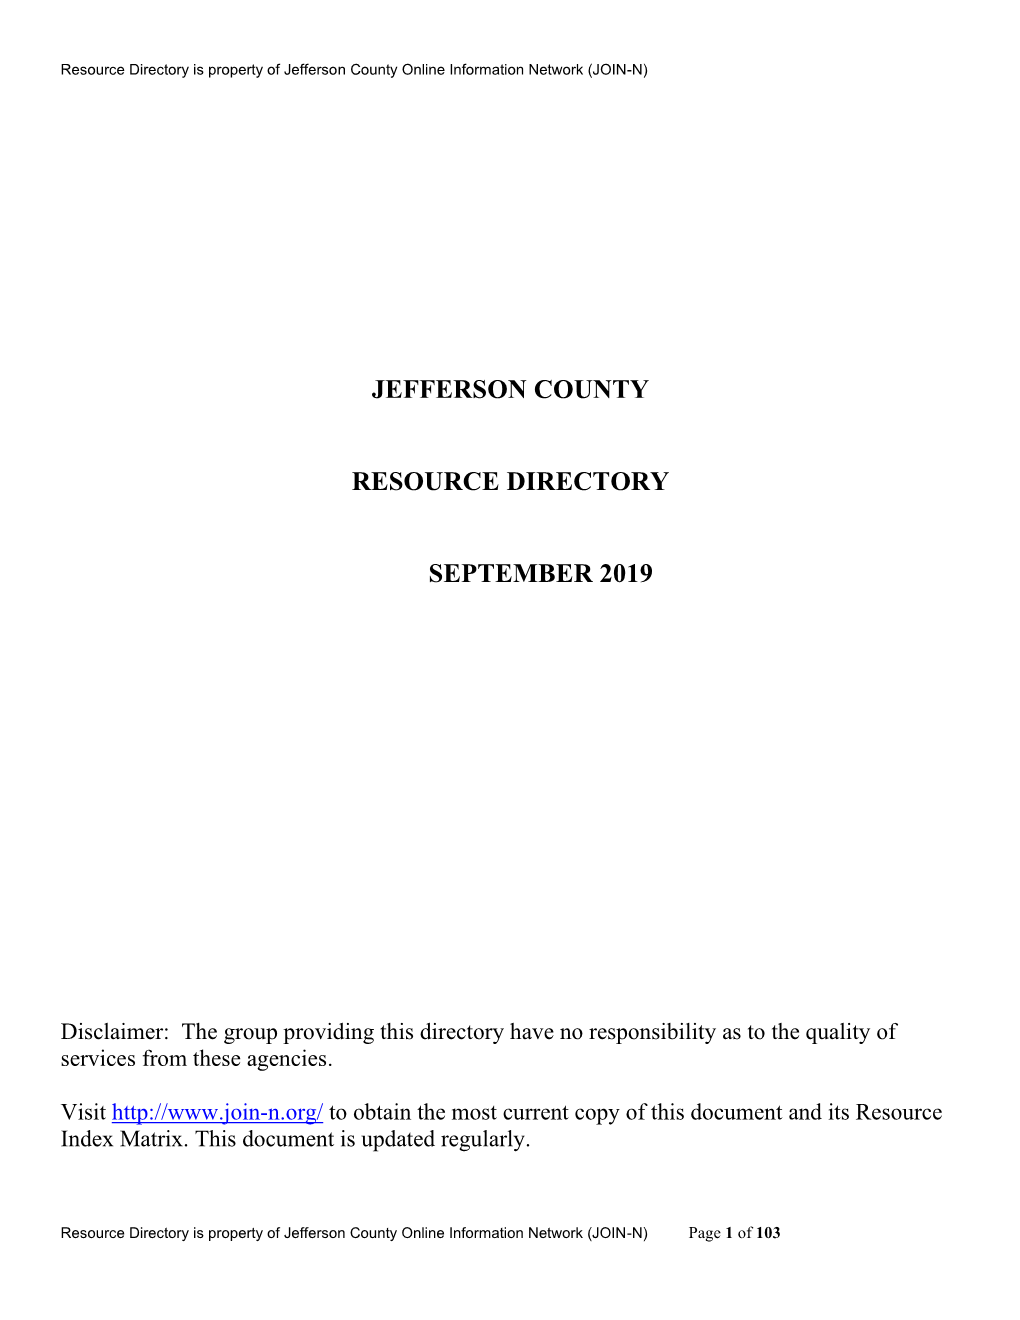 Jefferson County Resource Directory, Submit Changes Using This Form and Either Mail to JOIN-N, P.O